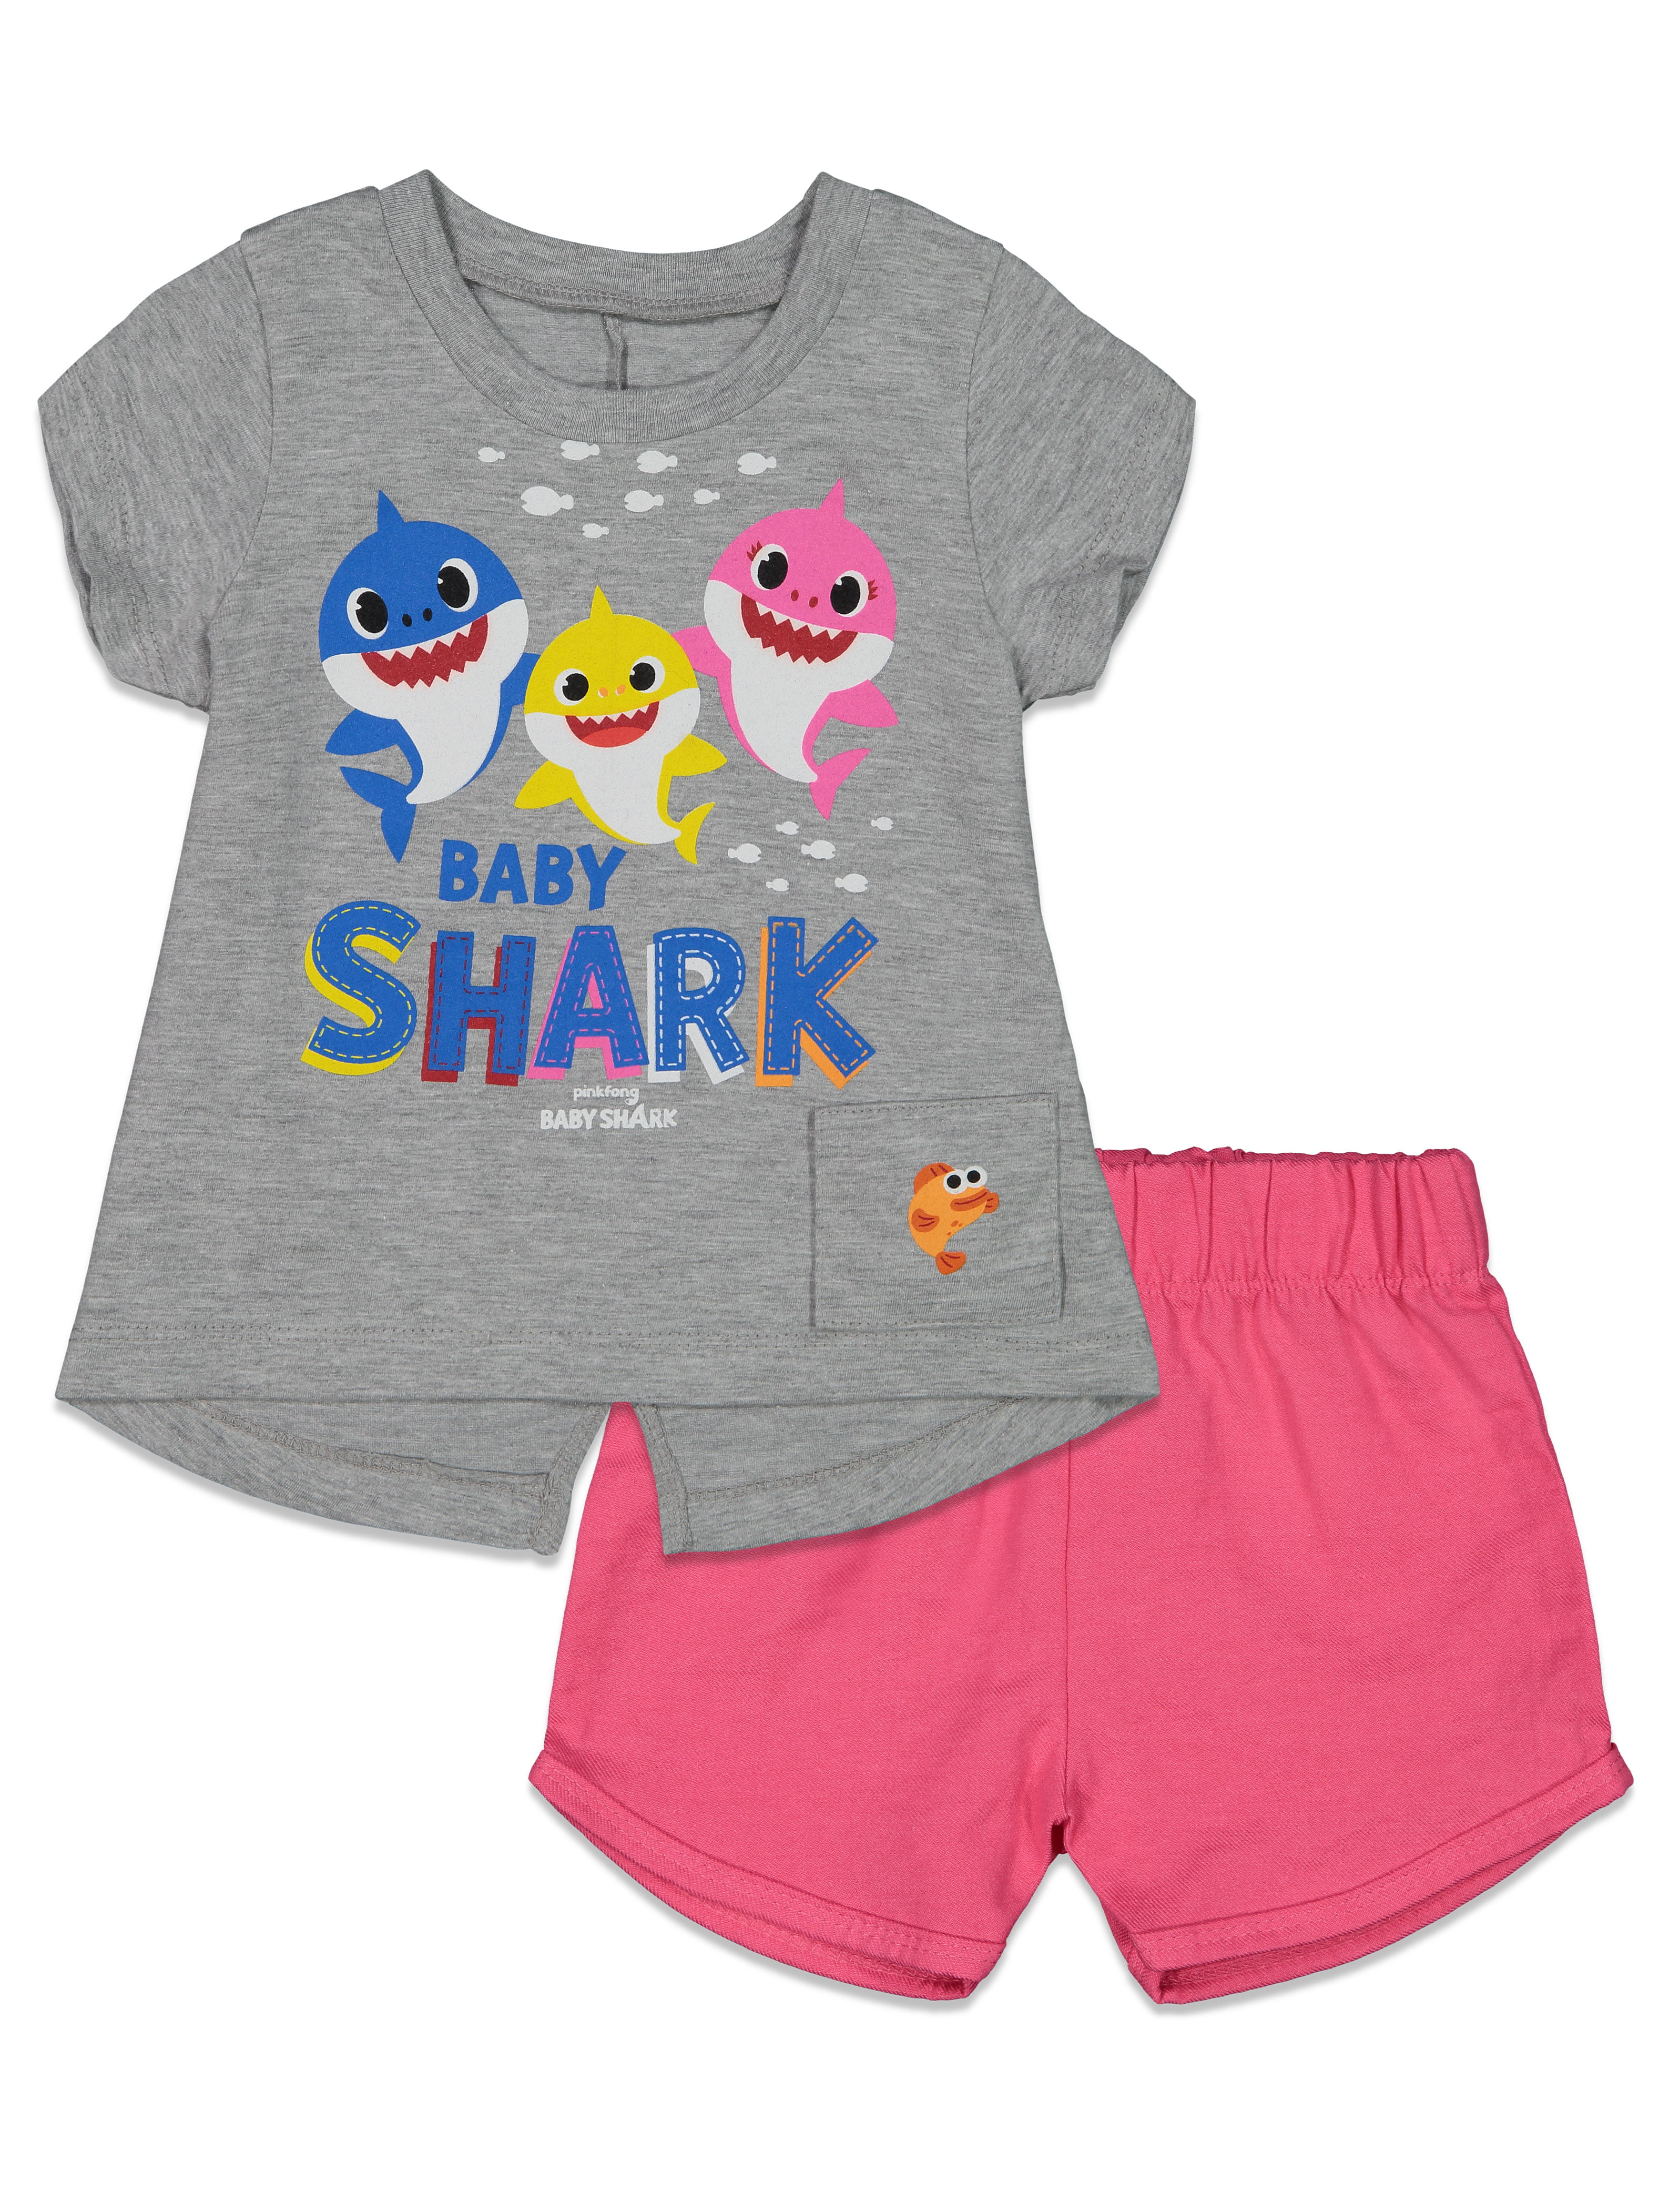 Pinkfong Baby Shark Toddler Girls Singing French Terry T-Shirt and Shorts Set with Sound Chip 4T Gray